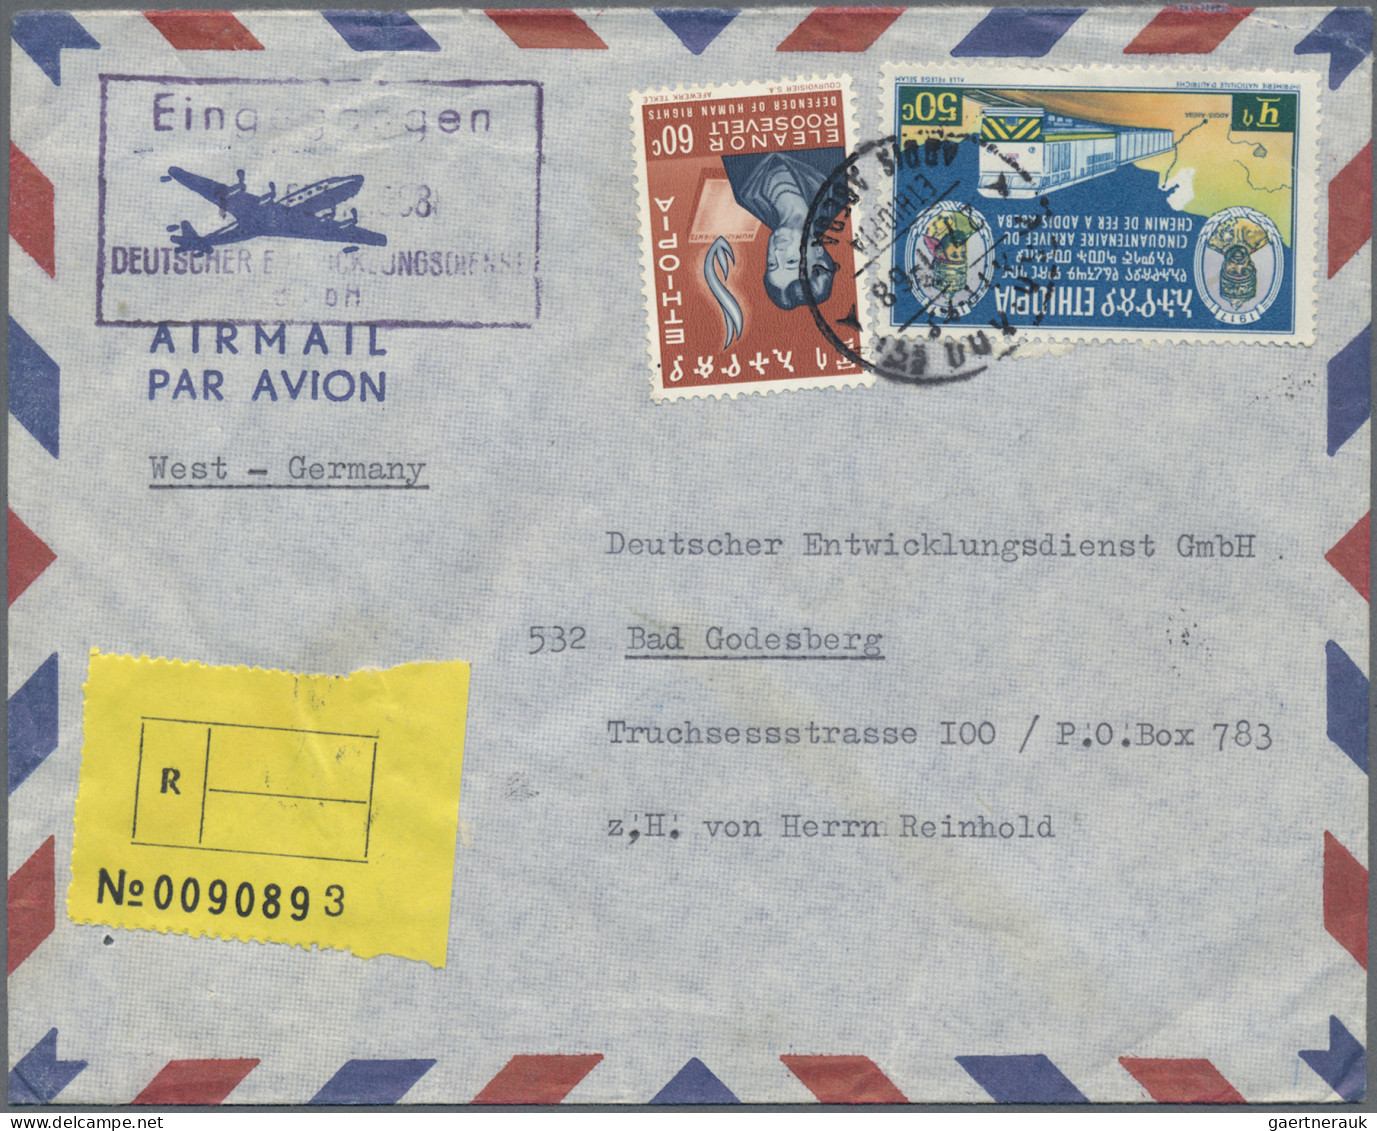 Oversea: 1930/1980 (ca.), balance of apprx. 320 covers/cards, comprising e.g. Am